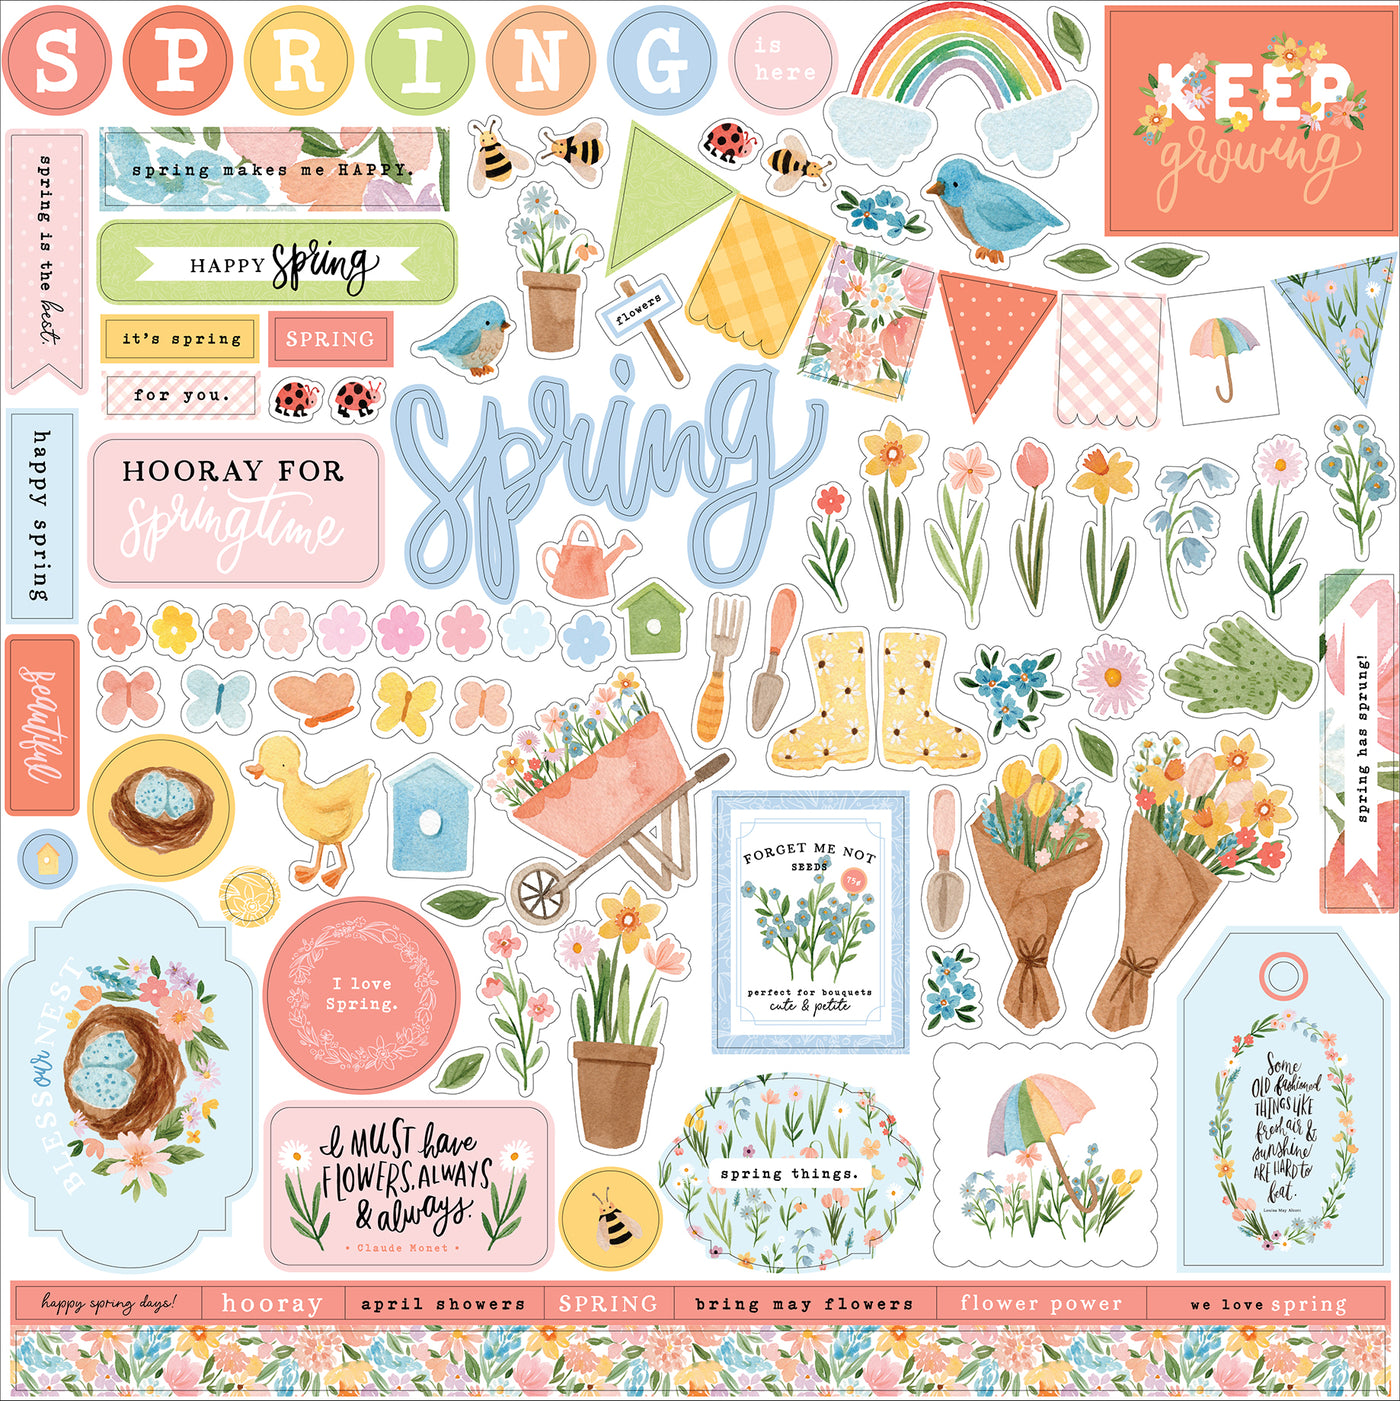 This sheet of stickers is full of spring elements, there are single flowers, bouquets of flowers, more flowers, a banner, the large words spring, a rainbow, rainboots, garden tools, border pieces, tags, bees, birds, framed images, words and phrases, and so much more. 